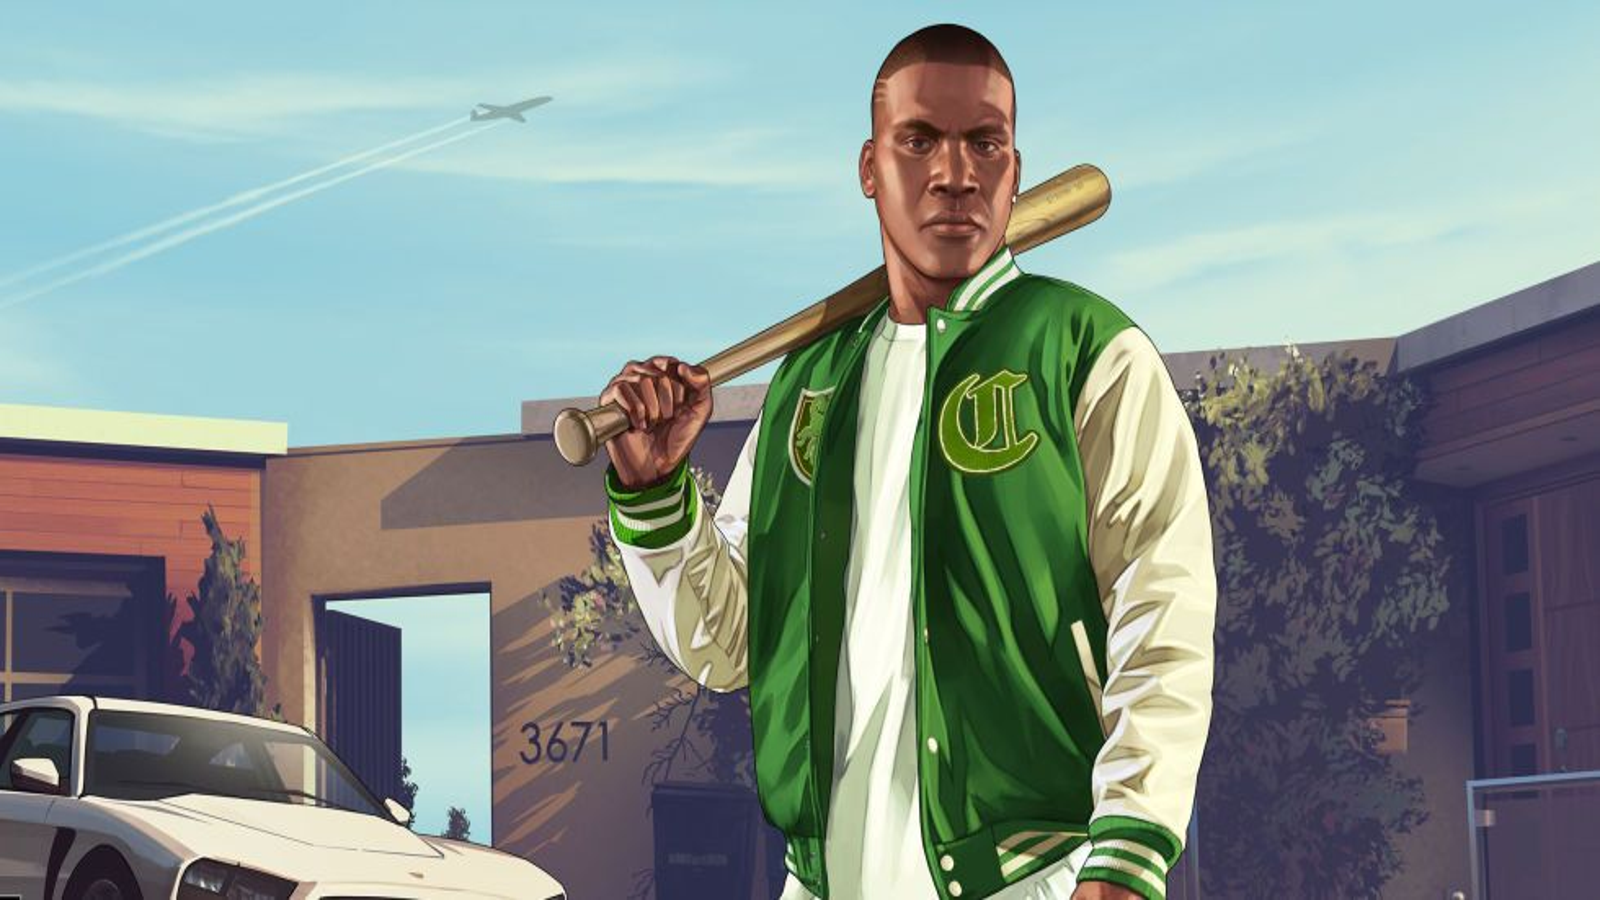 GTA Online Free for PS5 Owners for Three Months